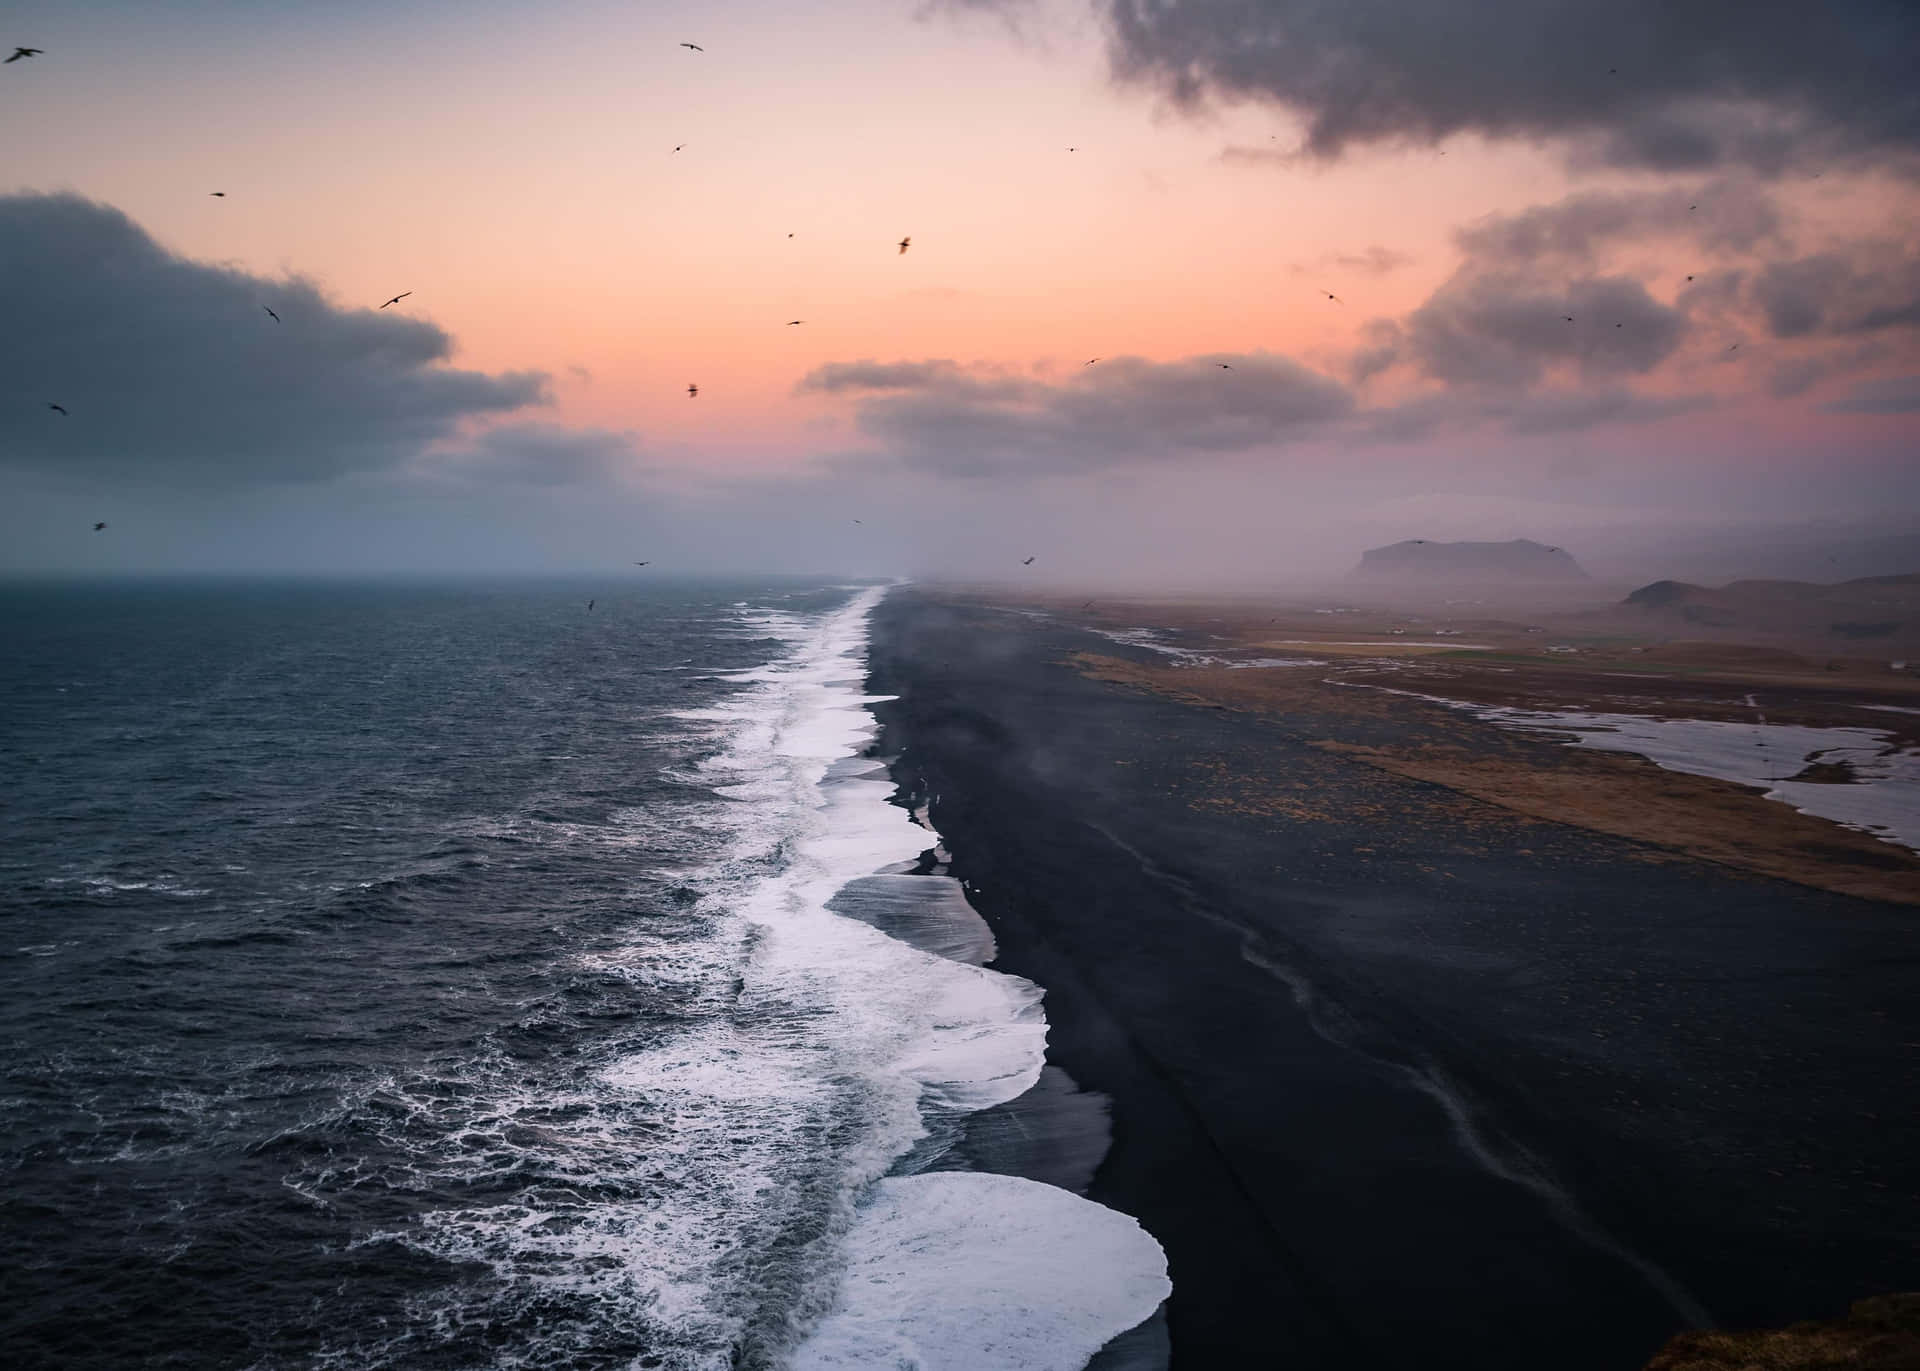 Take a breath of fresh air and experience the beauty of nature in this black sand beach. Wallpaper